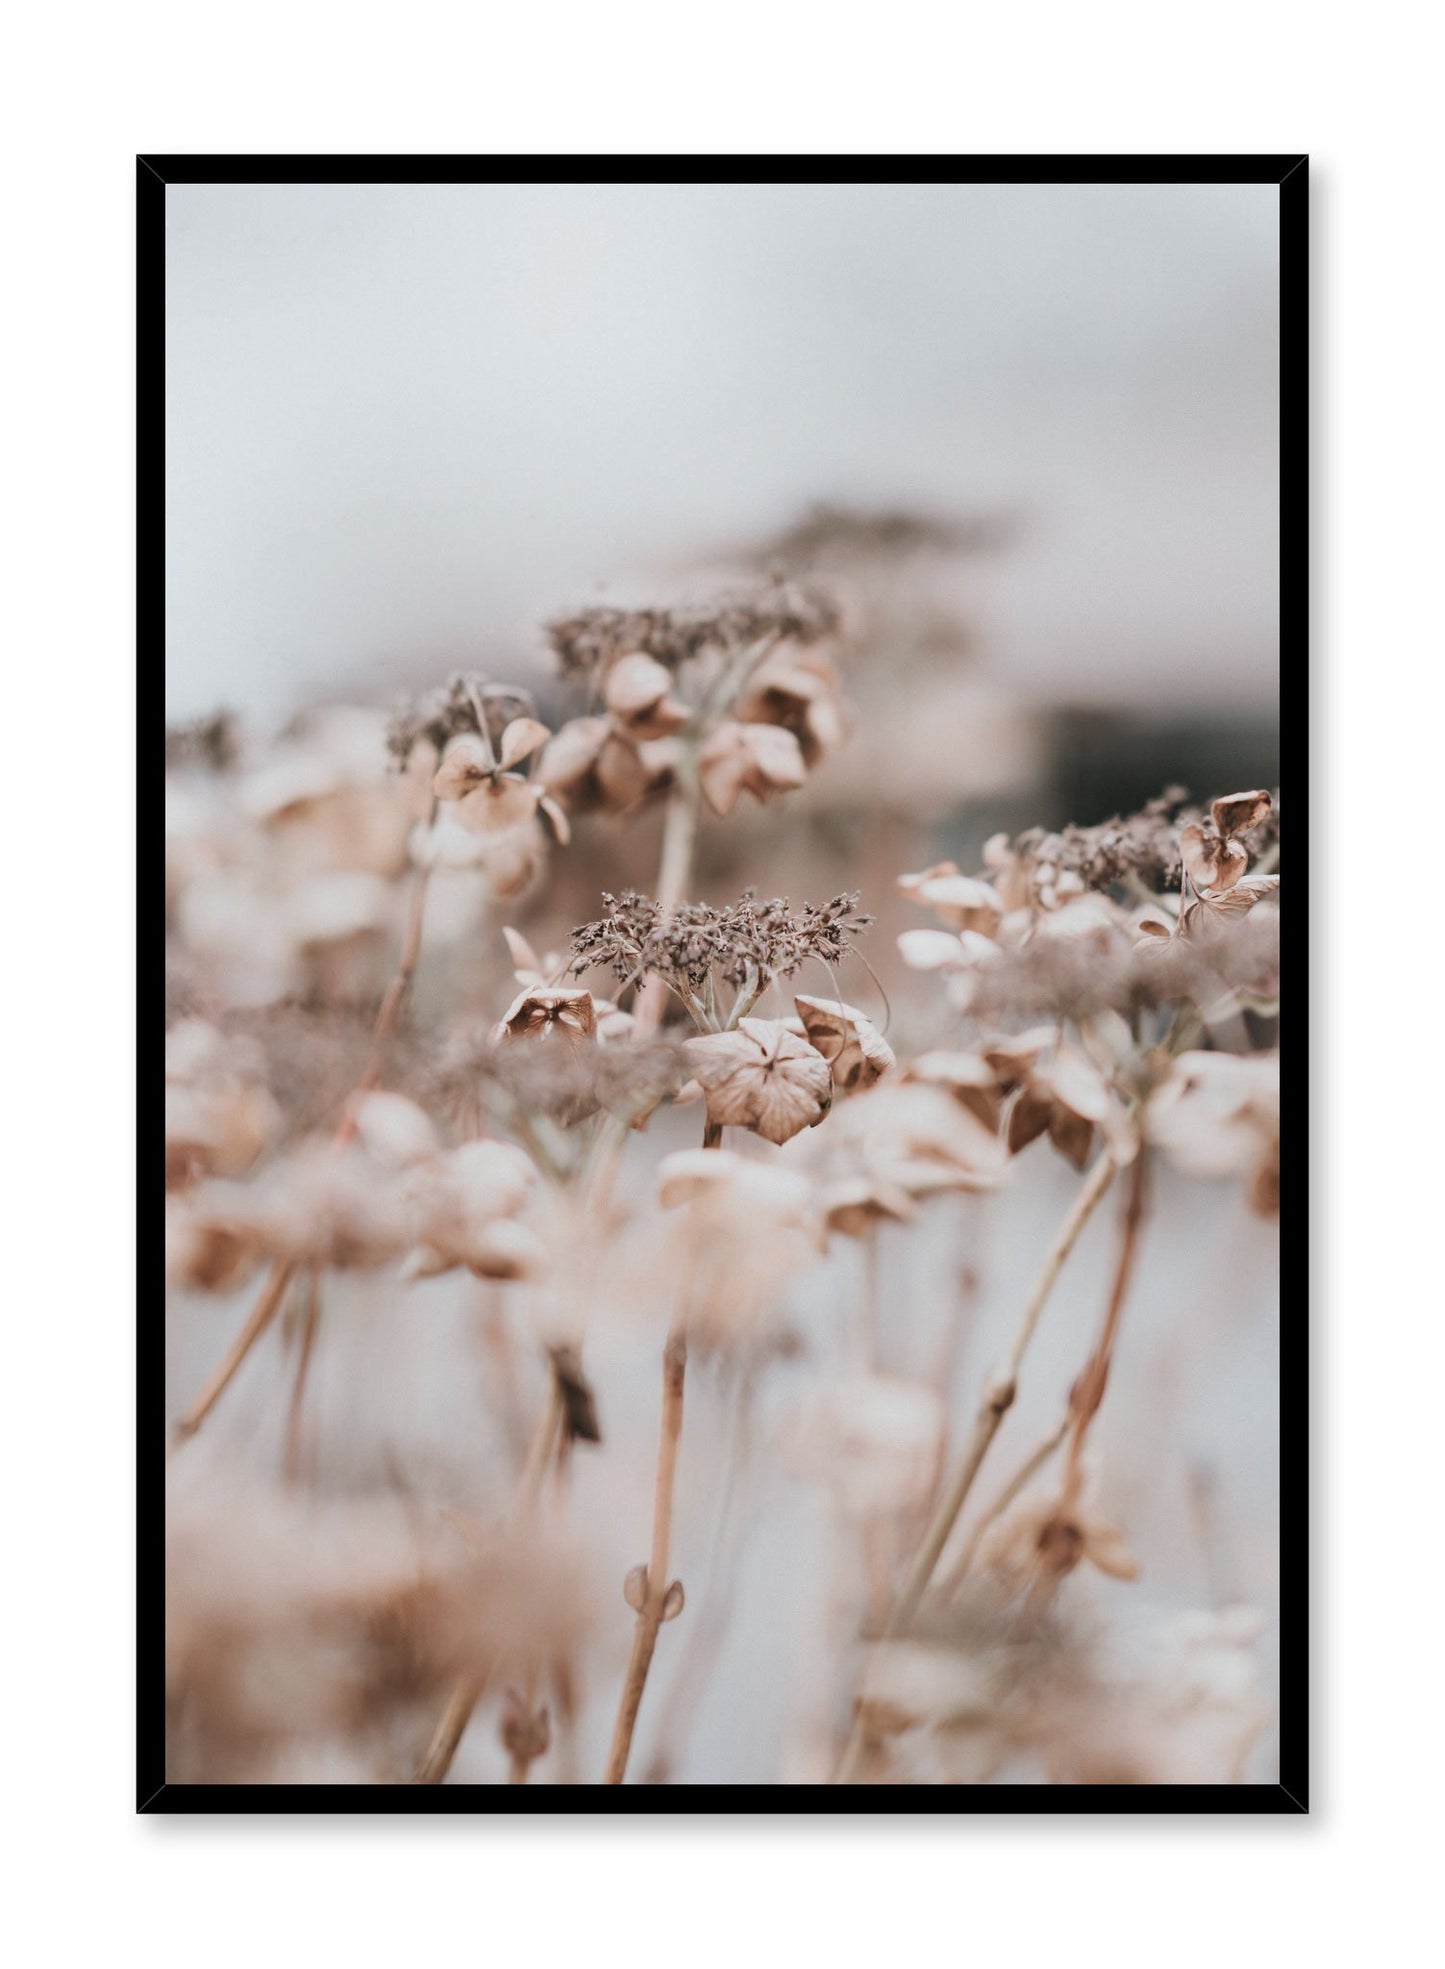 "Autumn Bloom" is a botanical photography poster by Opposite Wall of close-up brown autumn flowers.